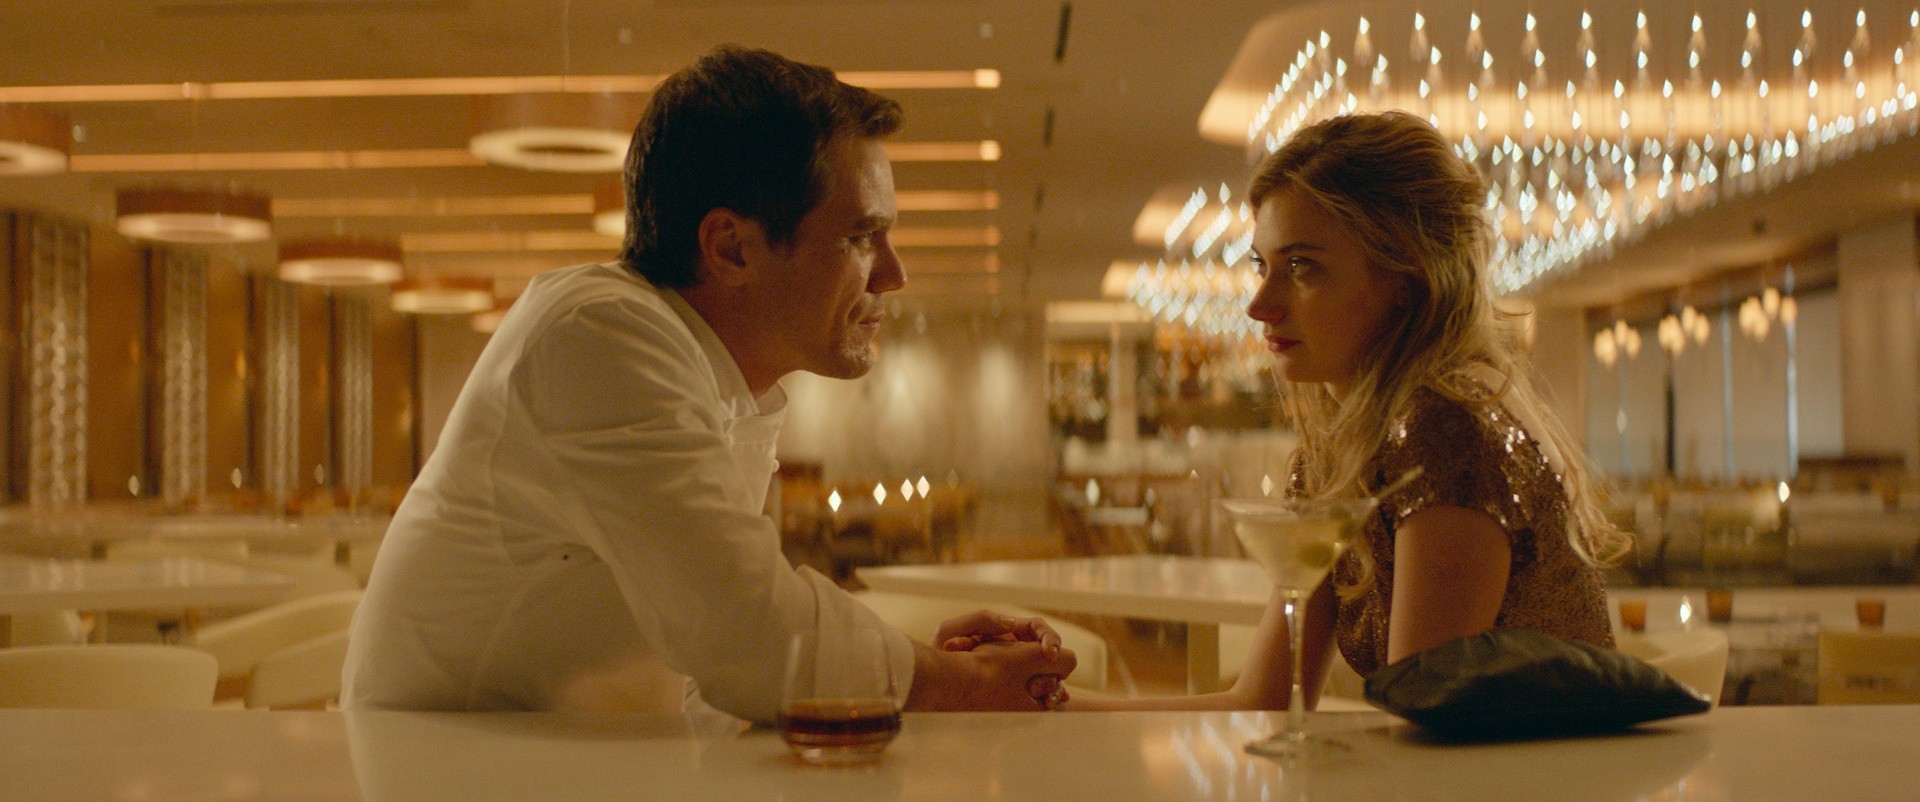 Michael Shannon stars as Frank and Imogen Poots stars as Lola in Paladin's Frank & Lola (2016)